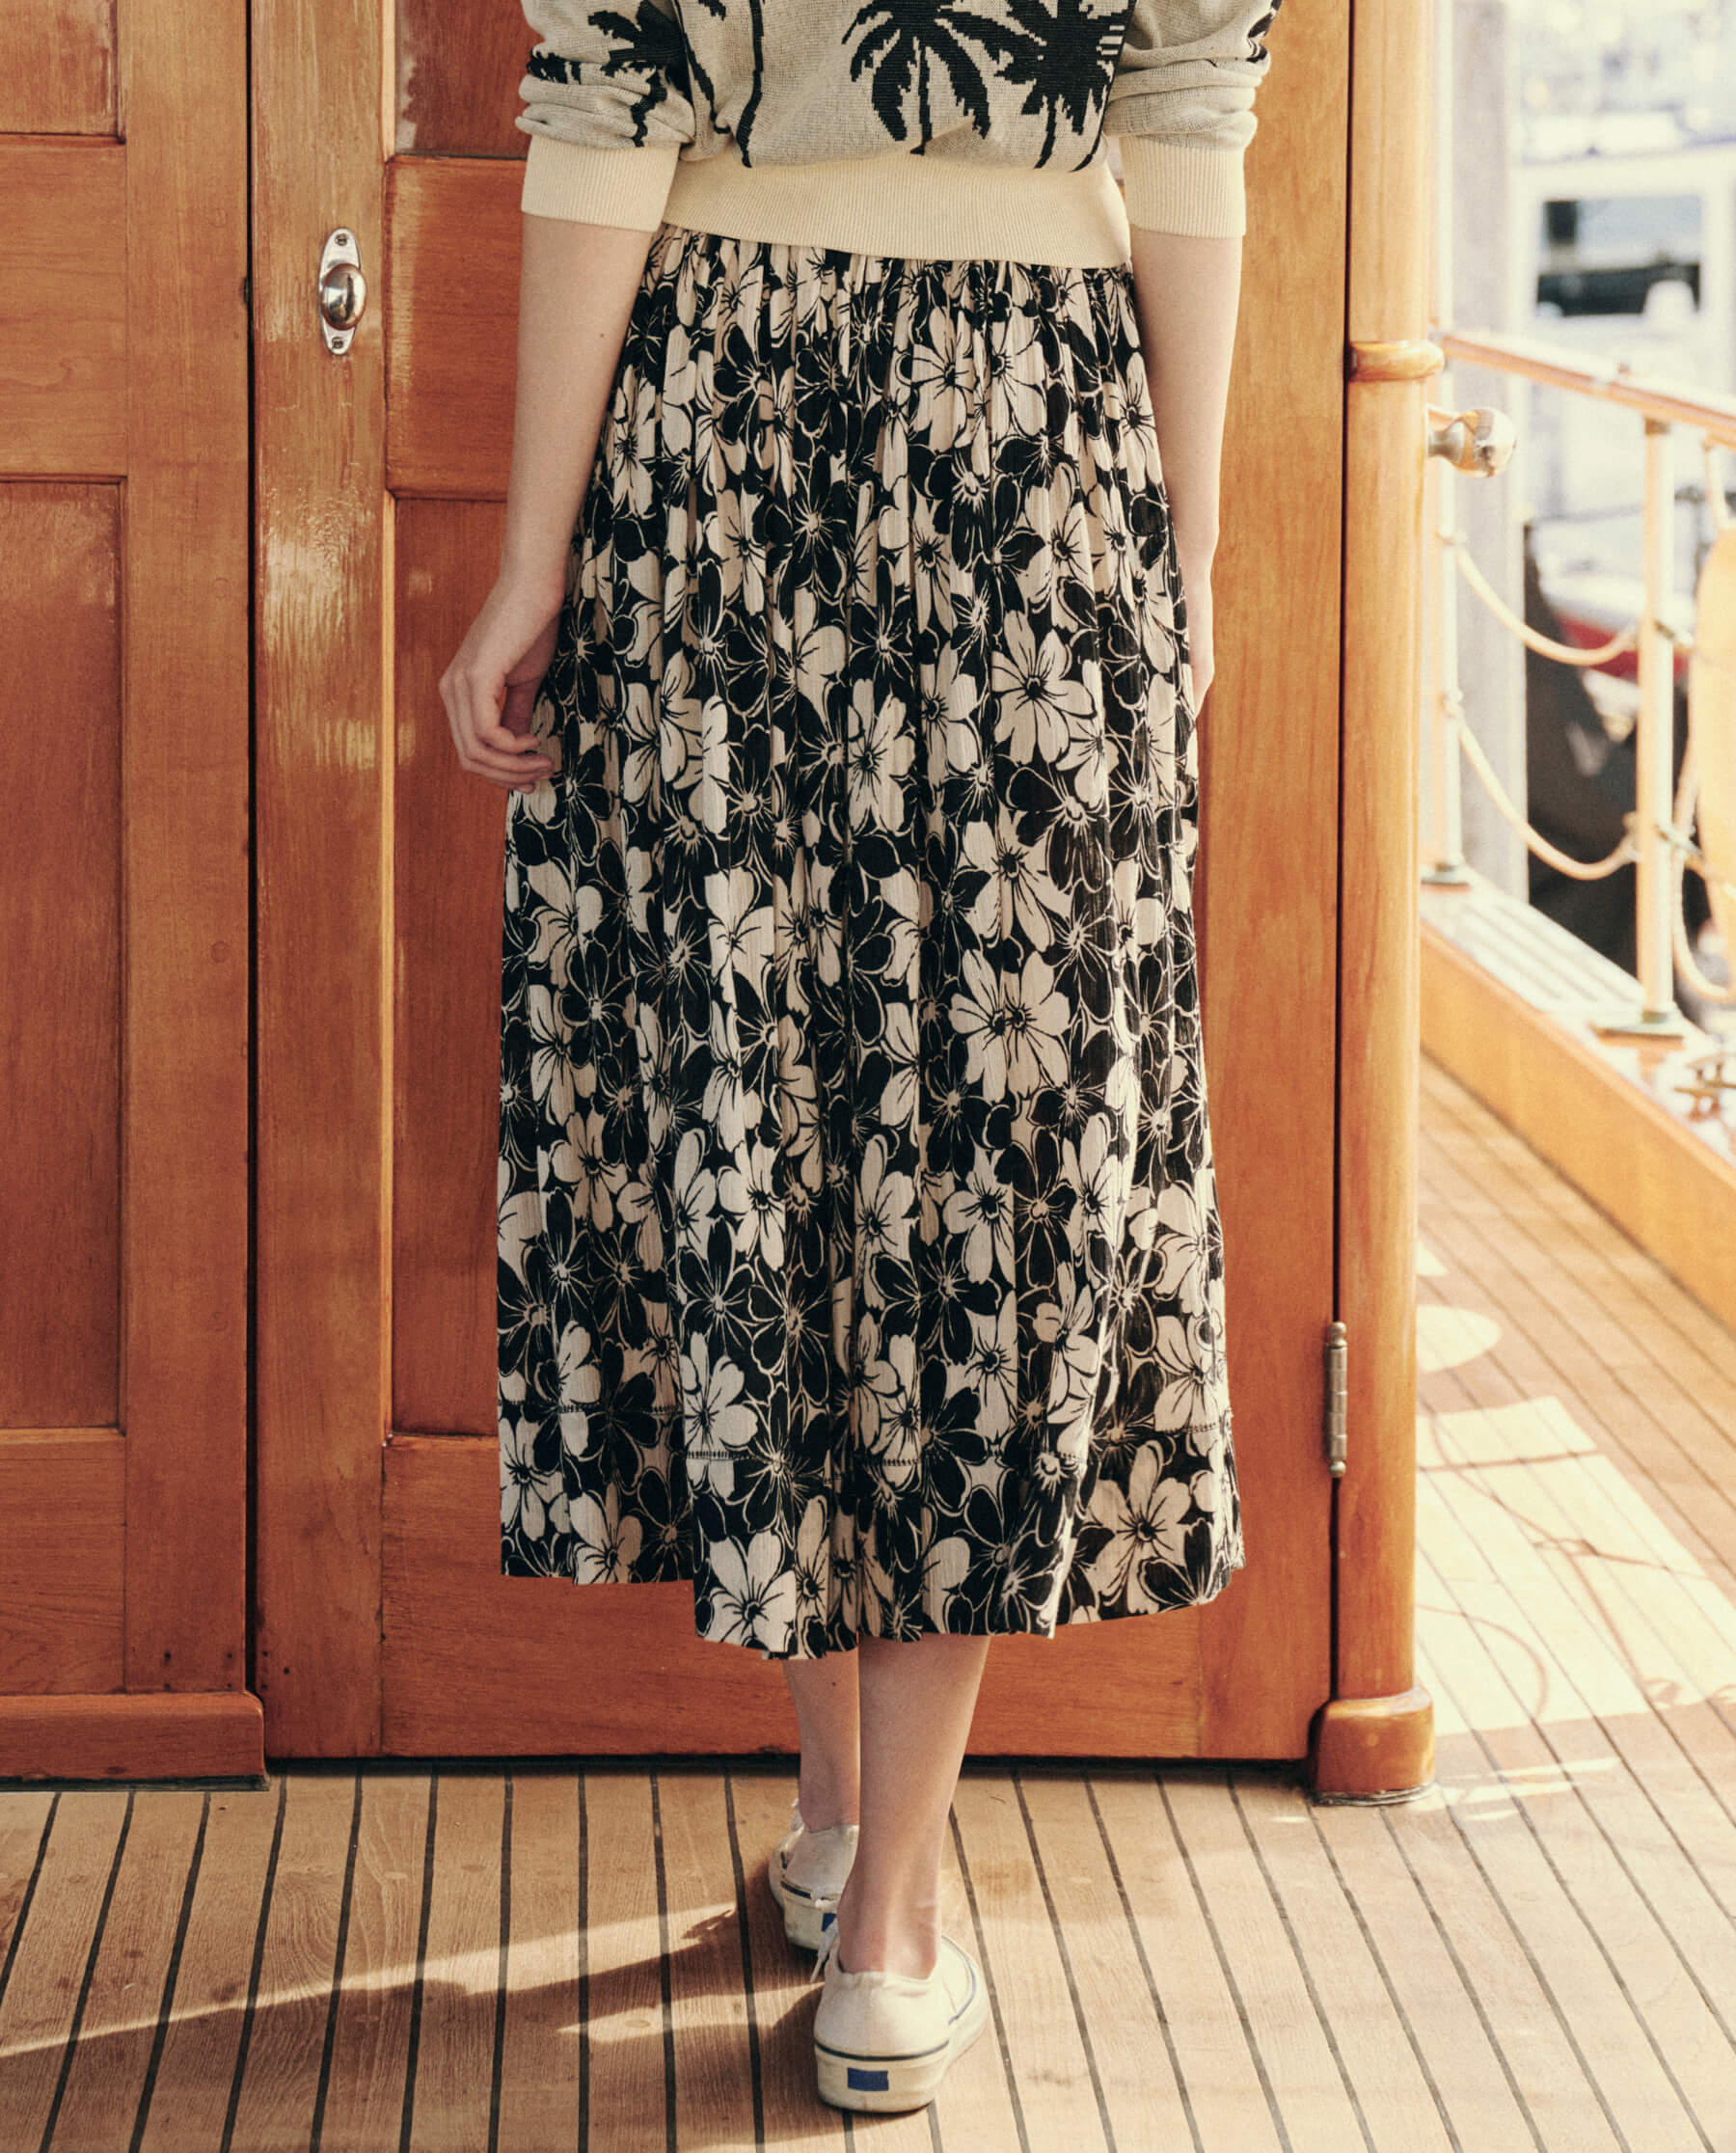 The Sway Skirt - Black/Cream Hibiscus Floral